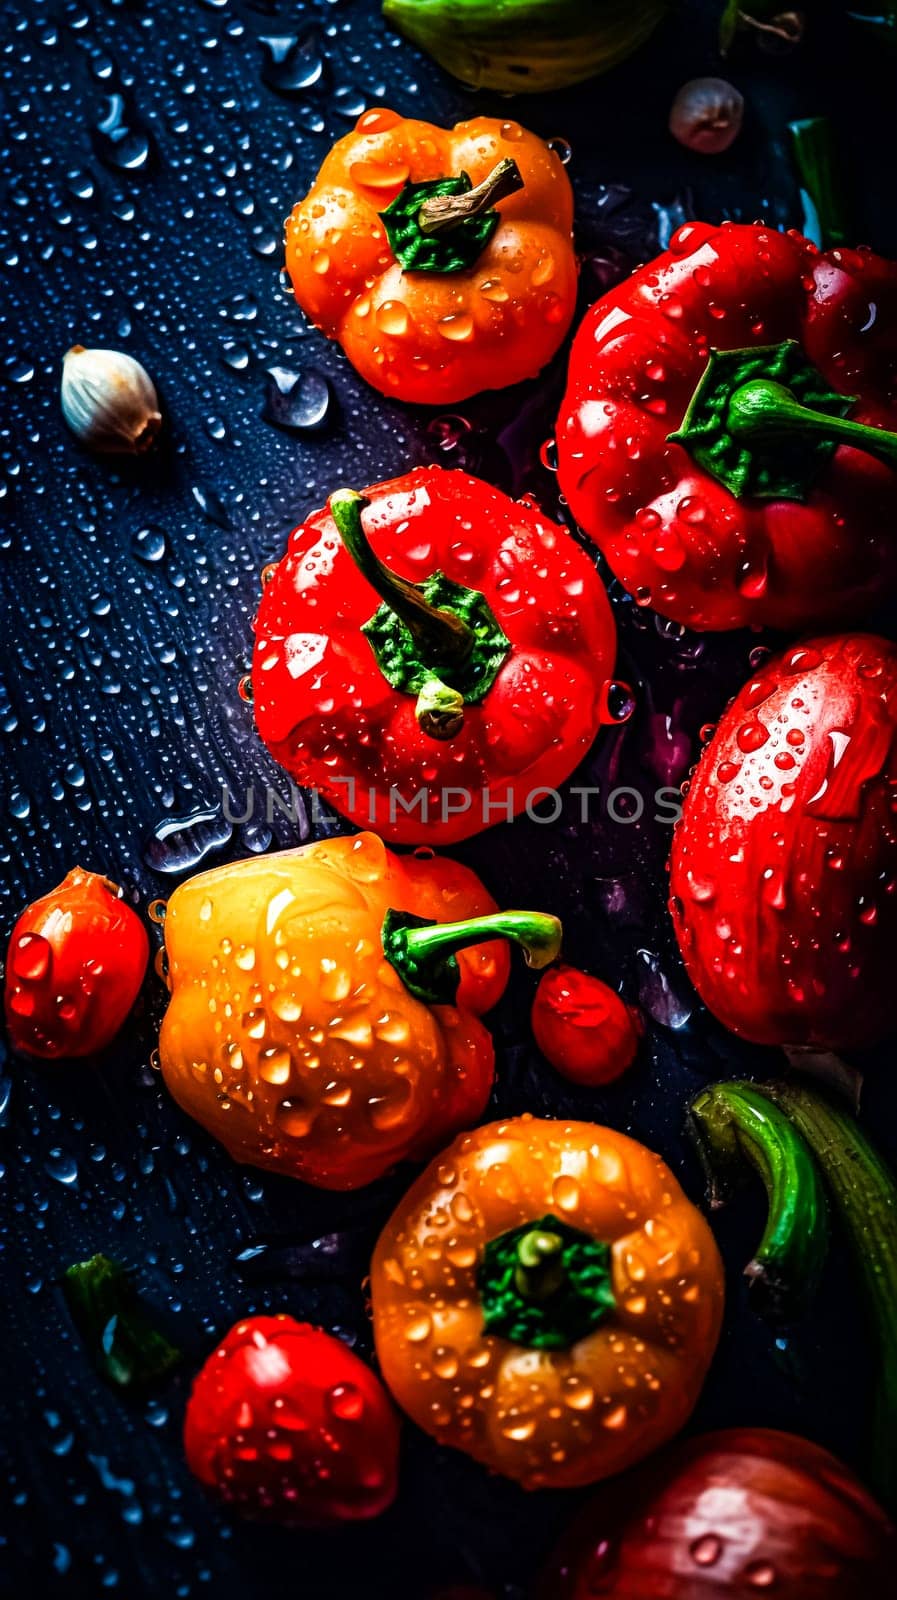 Top view magic Fresh vegetables glisten with water droplets on a dark canvas, a captivating symphony of nature's bounty and culinary artistry